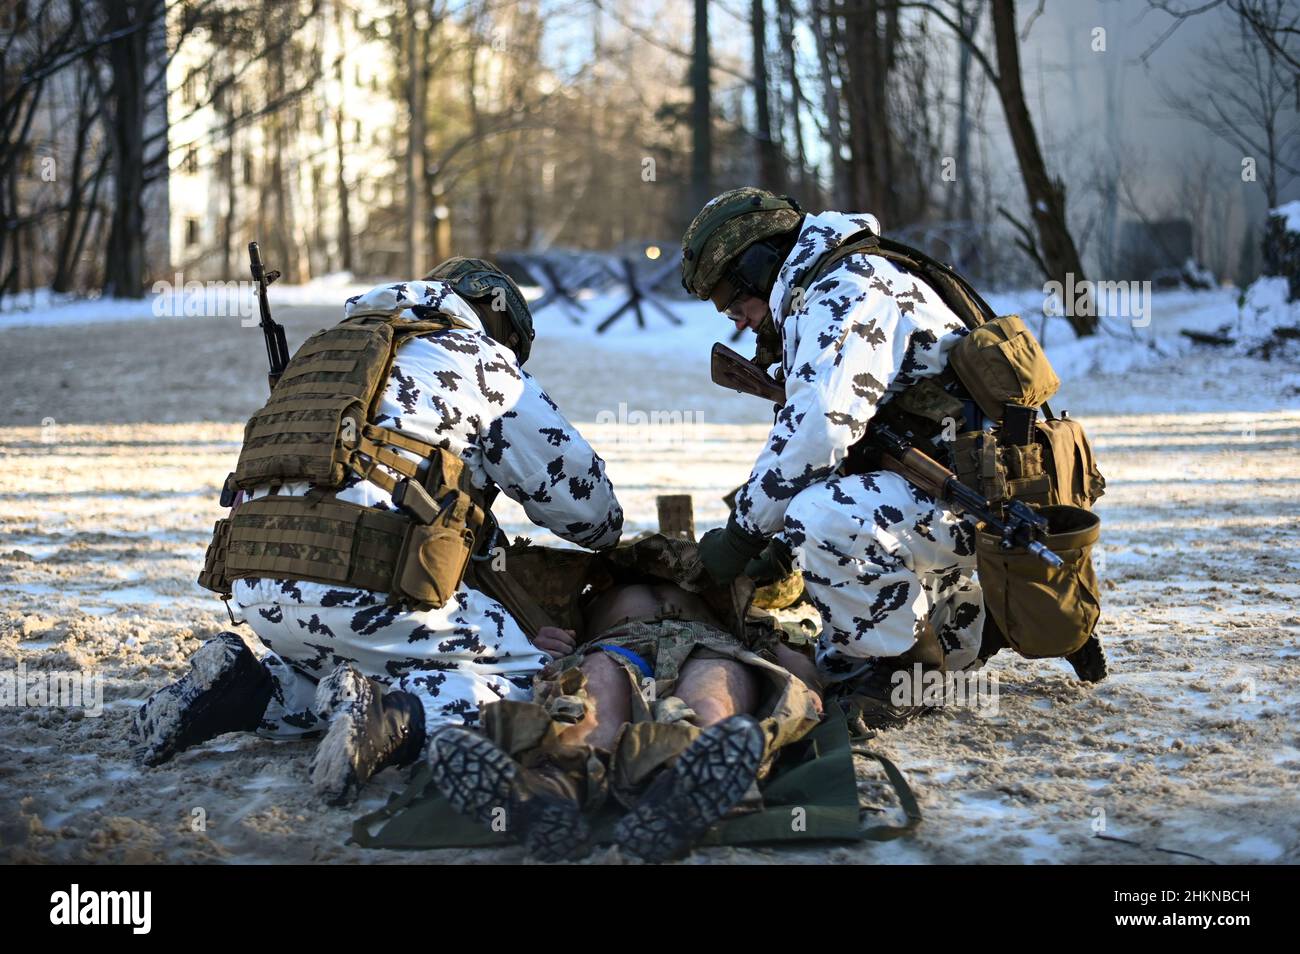 Pripyat, Ukraine. 04th Feb, 2022. Two Ukrainian National Guard soldiers perform tactical casualty care on a simulated casualty during an urban warfare exercise held in the village of Pripyat near the Belarussian border by the Ukrainian Ministry of Internal Affairs, as Russian forces continue to mobilize on the country's borders on February 4, 2022 in Pripyat, Ukraine. (Photo by Justin Yau/Sipa USA) Credit: Sipa USA/Alamy Live News Credit: Sipa USA/Alamy Live News Stock Photo